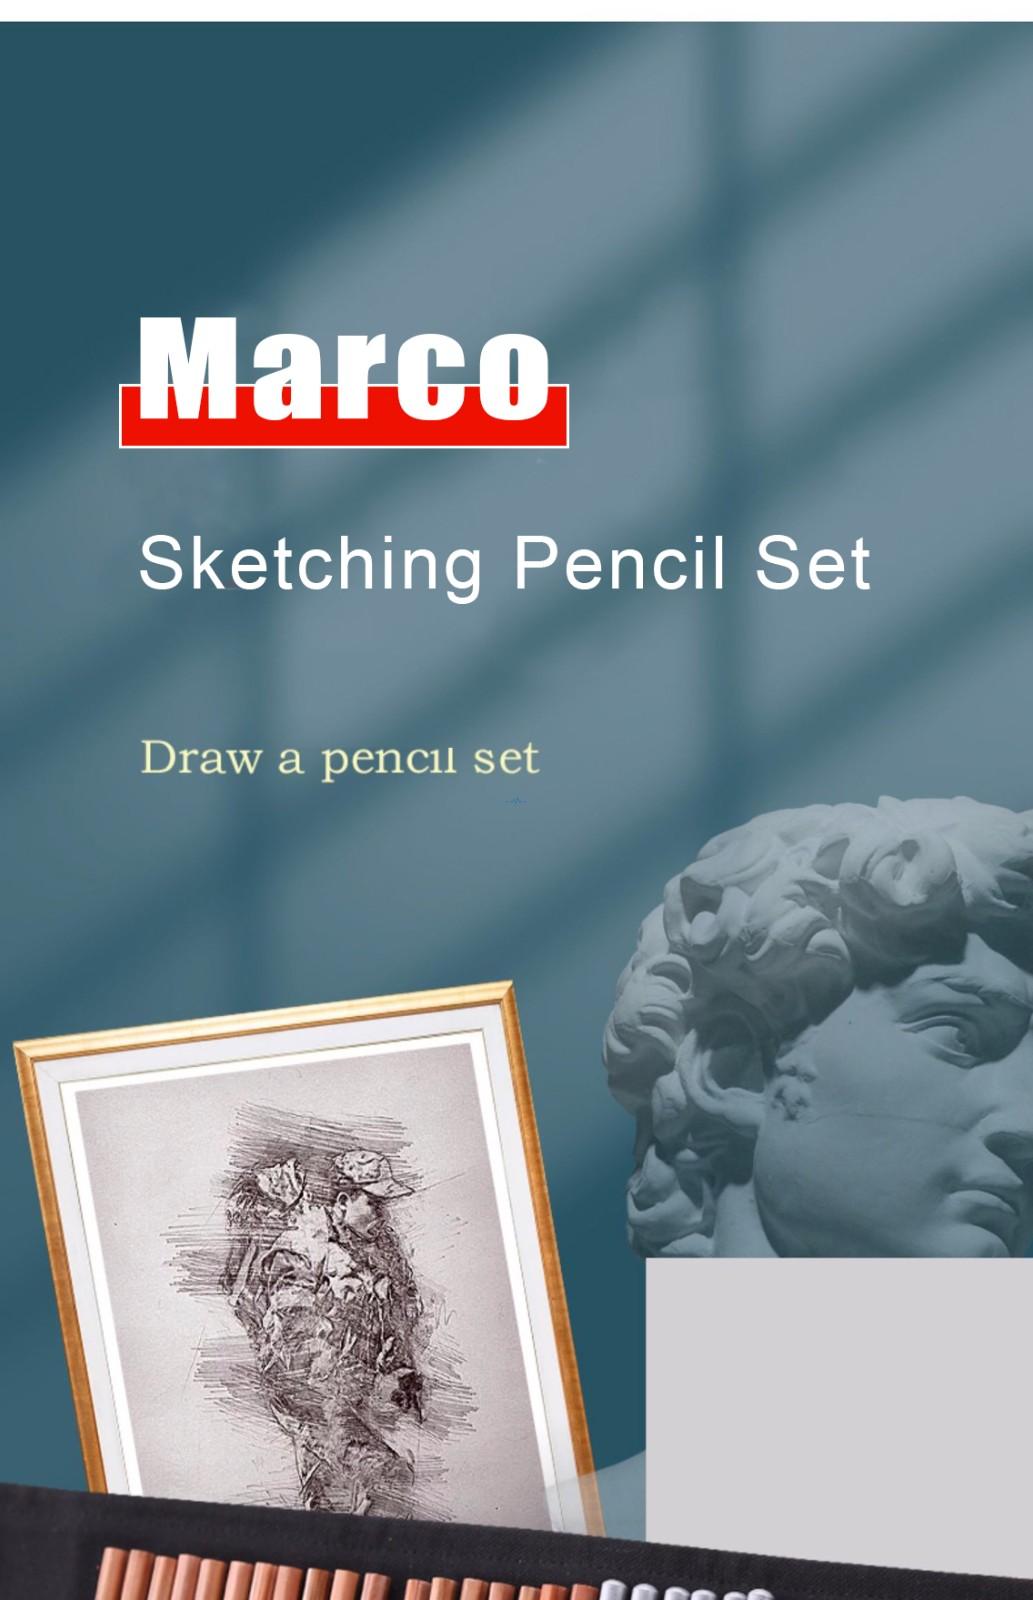 18pcs Sketching Pencils Case Marco Professional Drawing Kit with Paper  Erasers Knife Art School Supplies